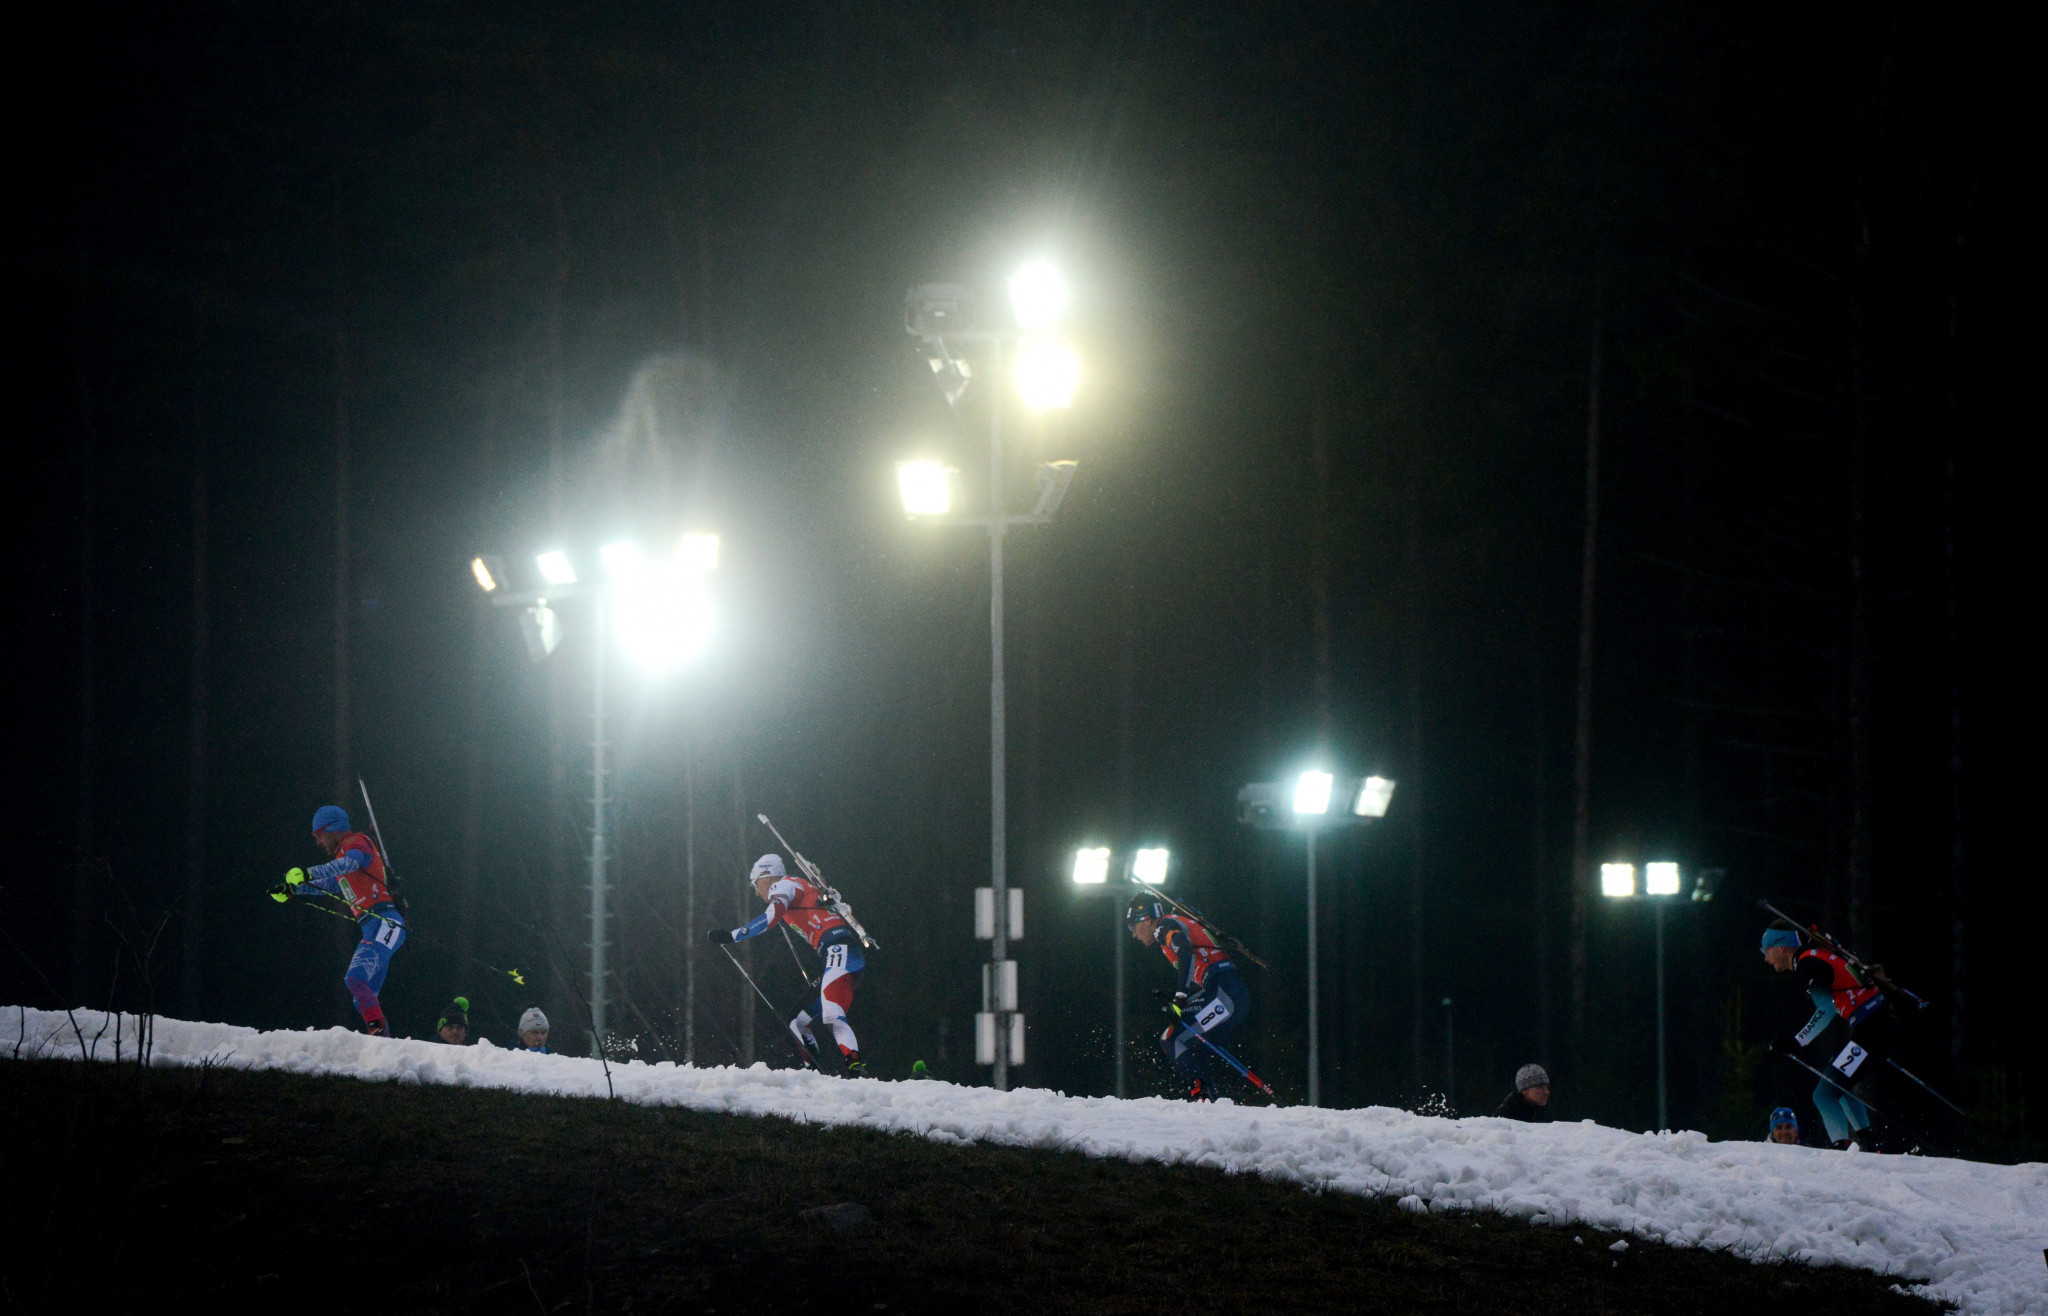 The three athletes competed at IBU Cup level last season ©Getty Images